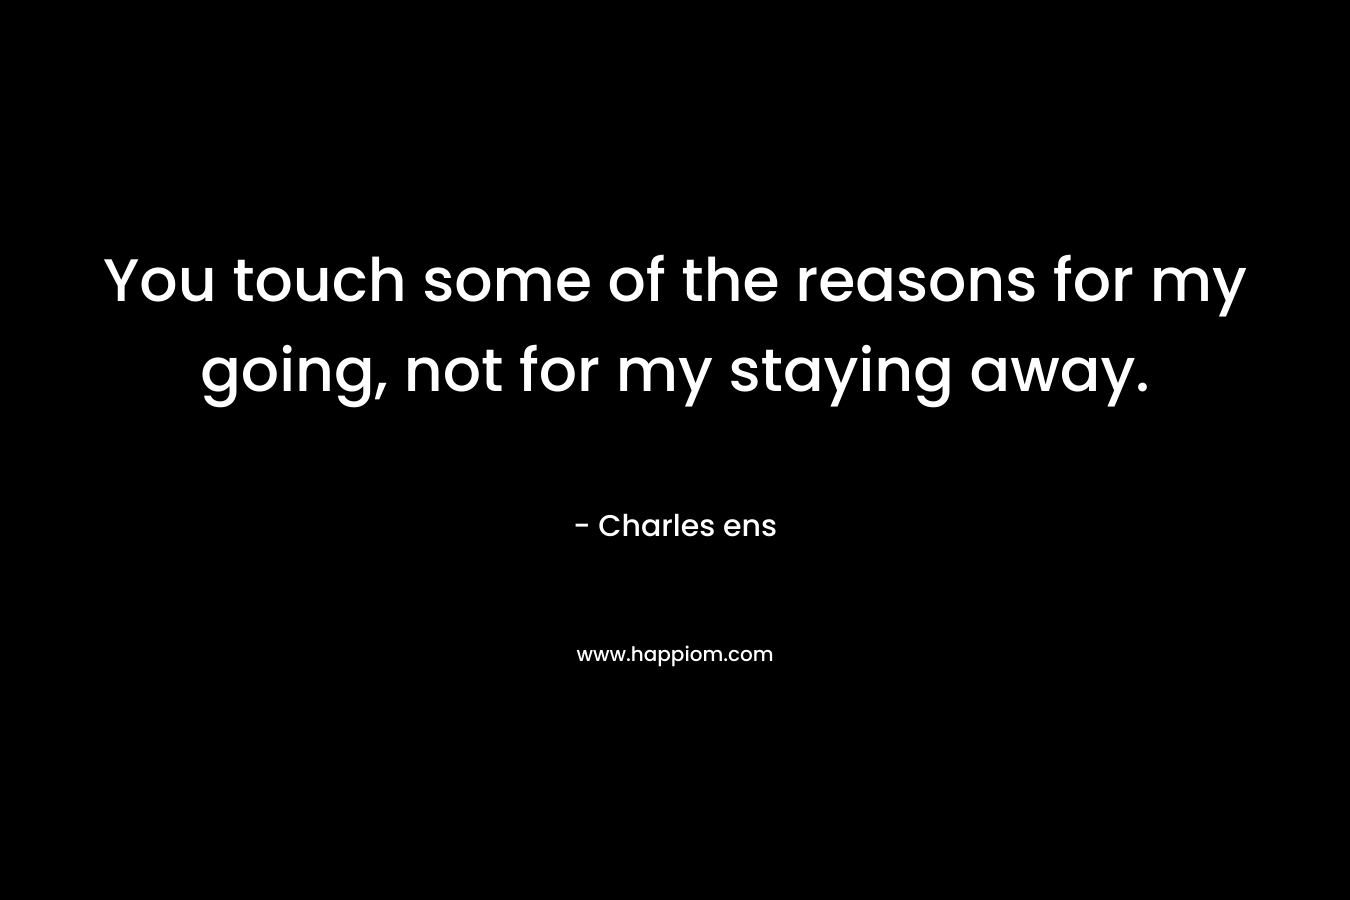 You touch some of the reasons for my going, not for my staying away.